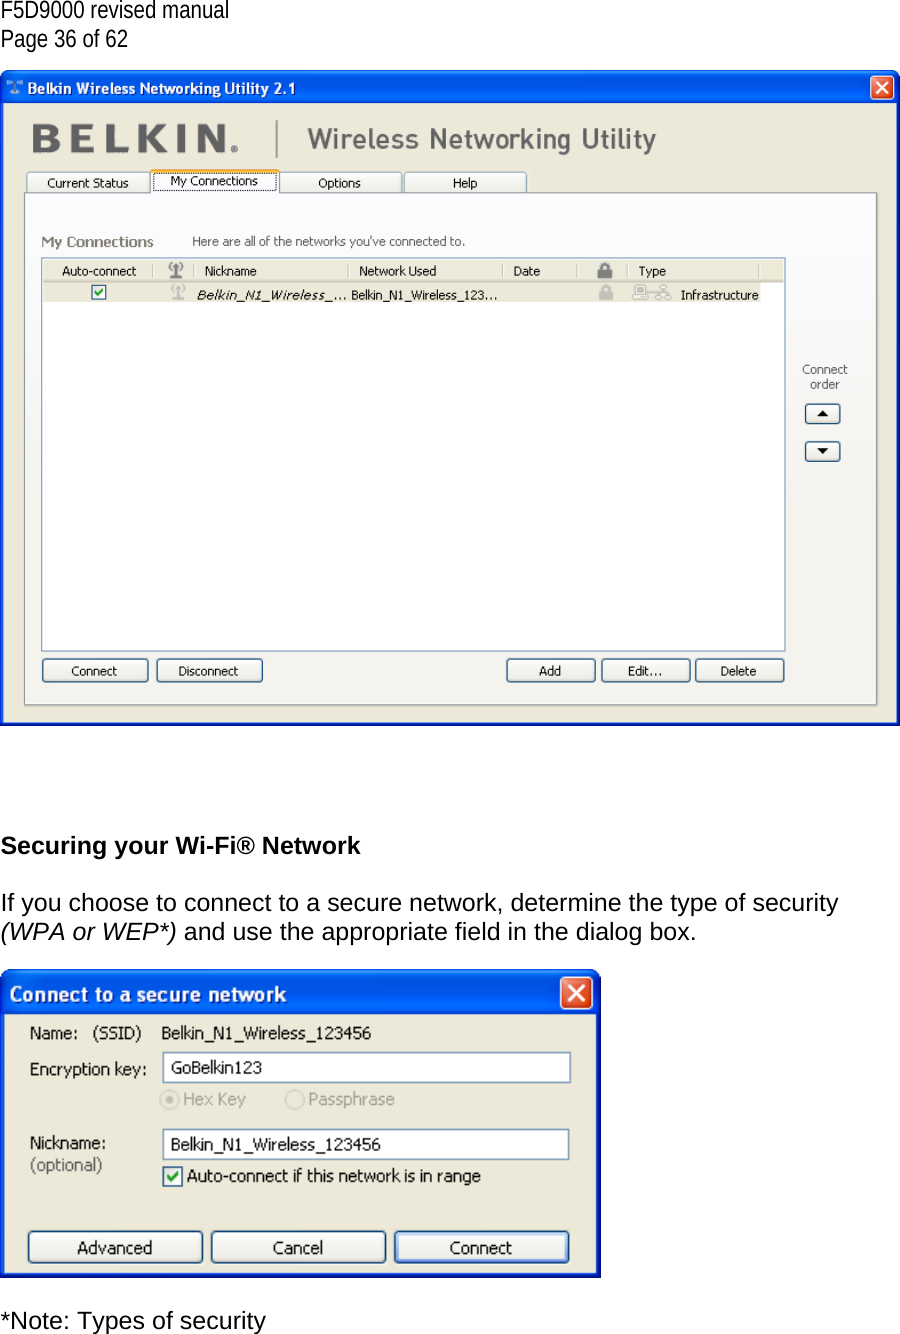 F5D9000 revised manual Page 36 of 62      Securing your Wi-Fi® Network  If you choose to connect to a secure network, determine the type of security (WPA or WEP*) and use the appropriate field in the dialog box.    *Note: Types of security   